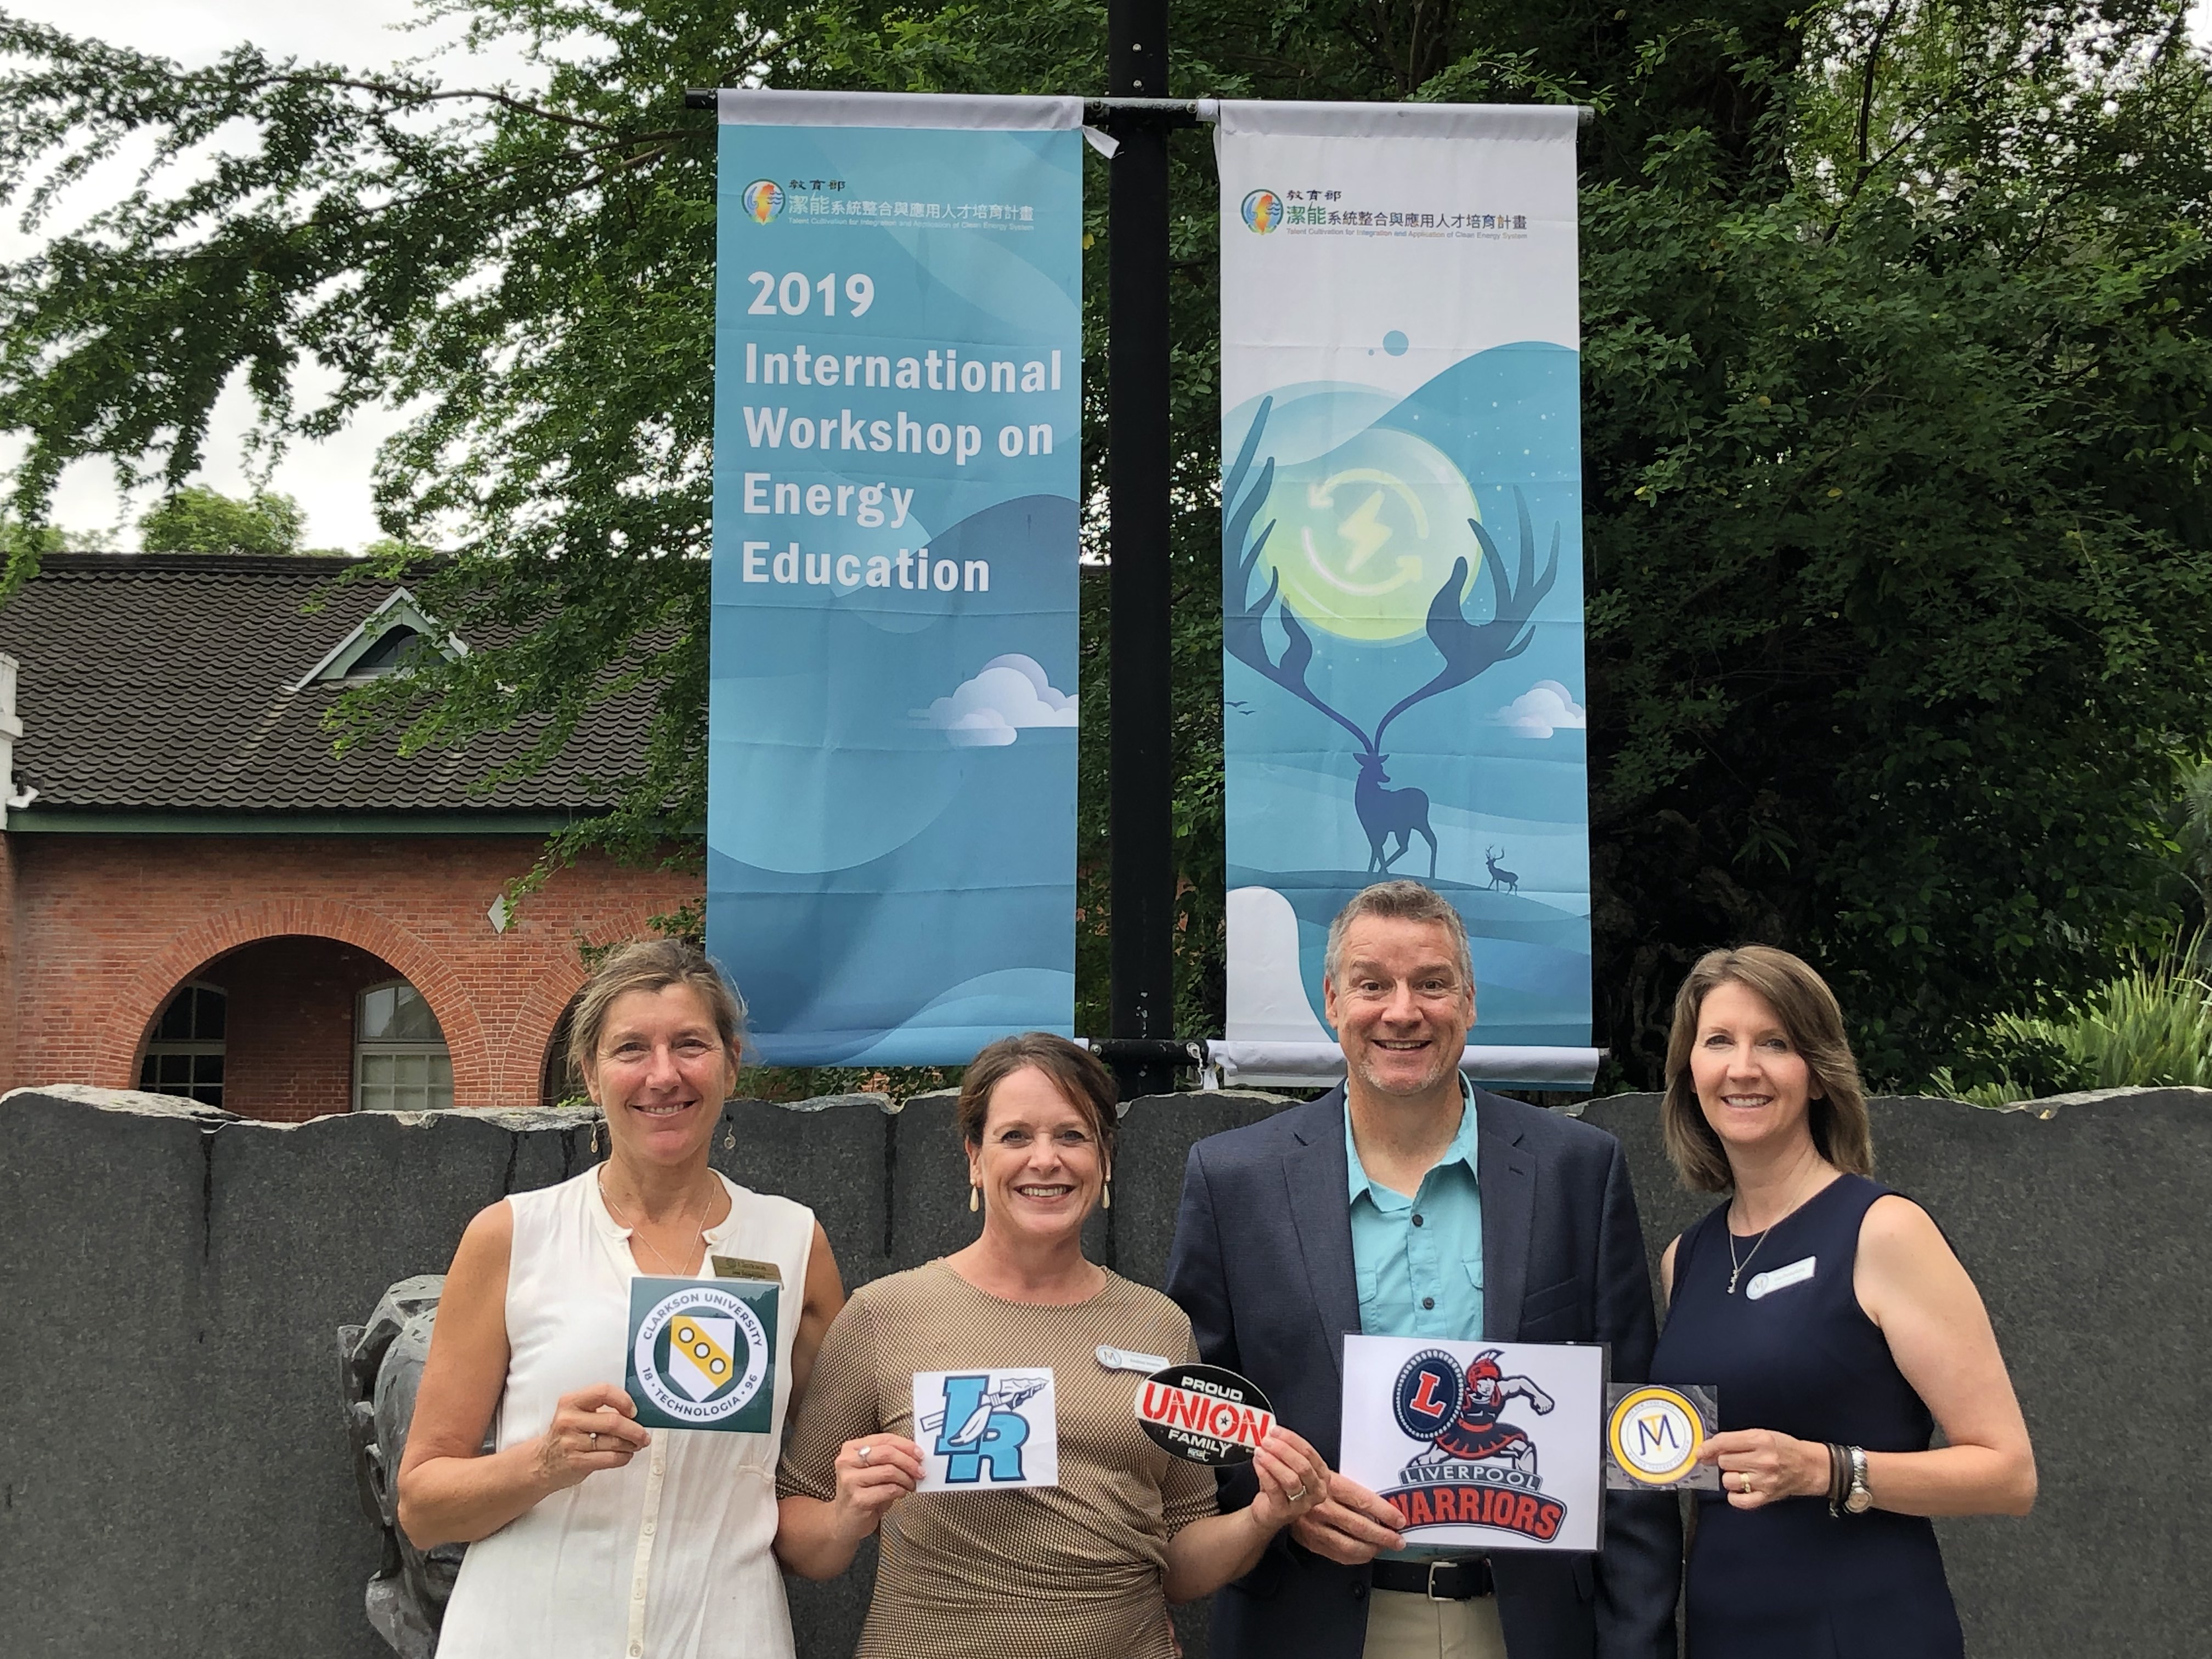 L-R: Jan DeWaters, Andrea Inserra, Andrew Calderwood, & Lisa Dunkelberg are pictured with their respective school placards at the workshop they attended